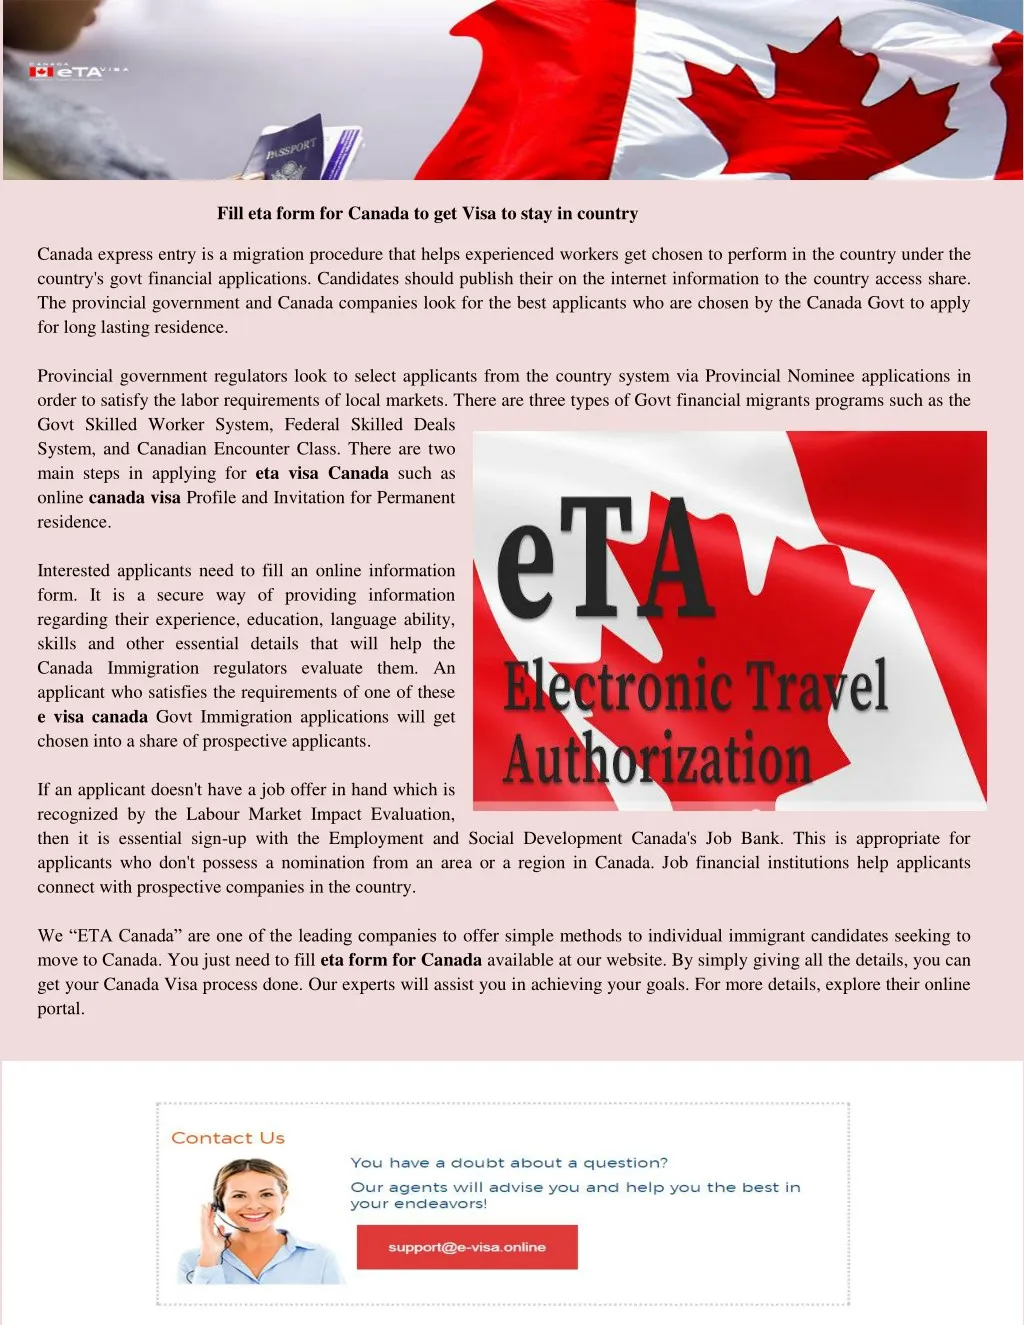 fill eta form for canada to get visa to stay